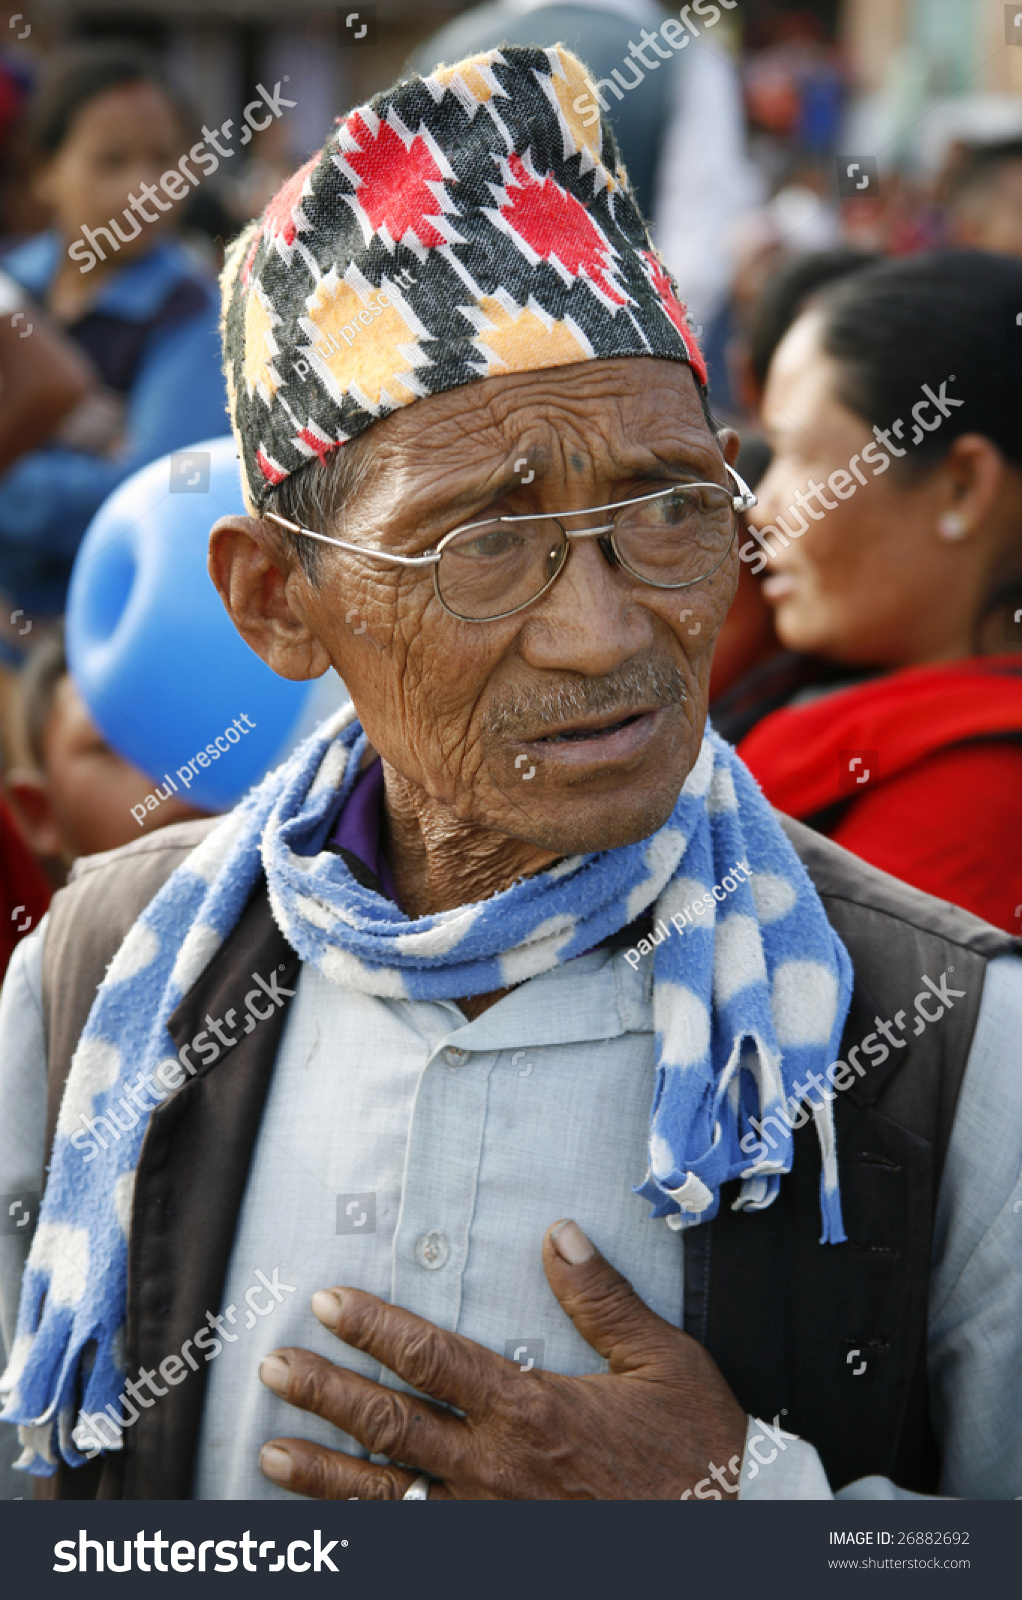 Save to a lightbox - stock-photo-bhaktapur-nepal-april-old-nepali-man-with-traditional-topi-hat-during-the-nepali-new-year-in-26882692